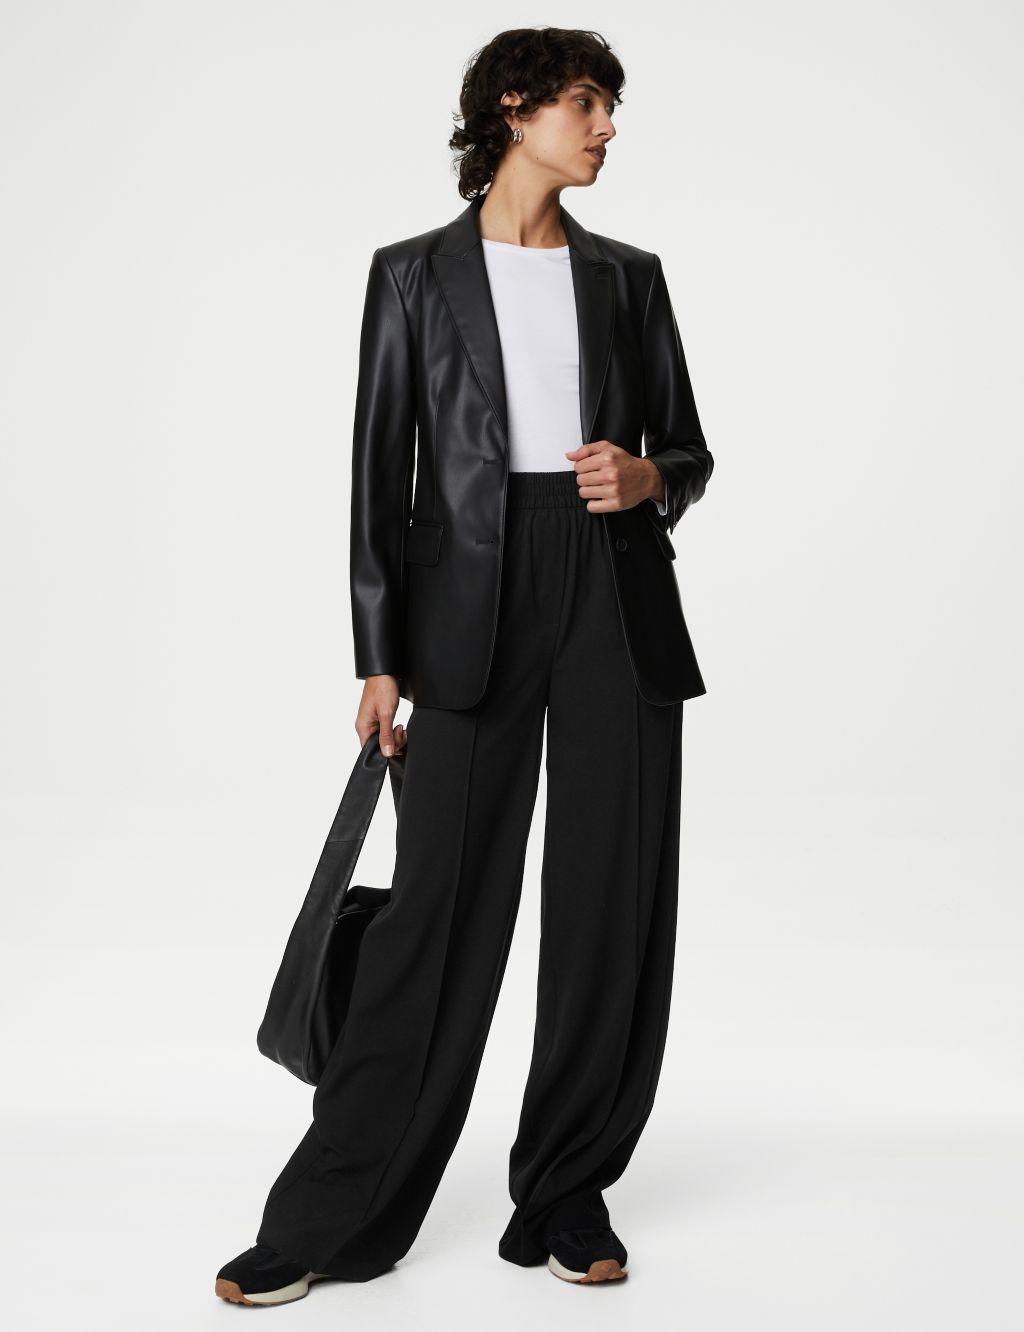 Wide Leg Trousers | M&S Collection | M&S